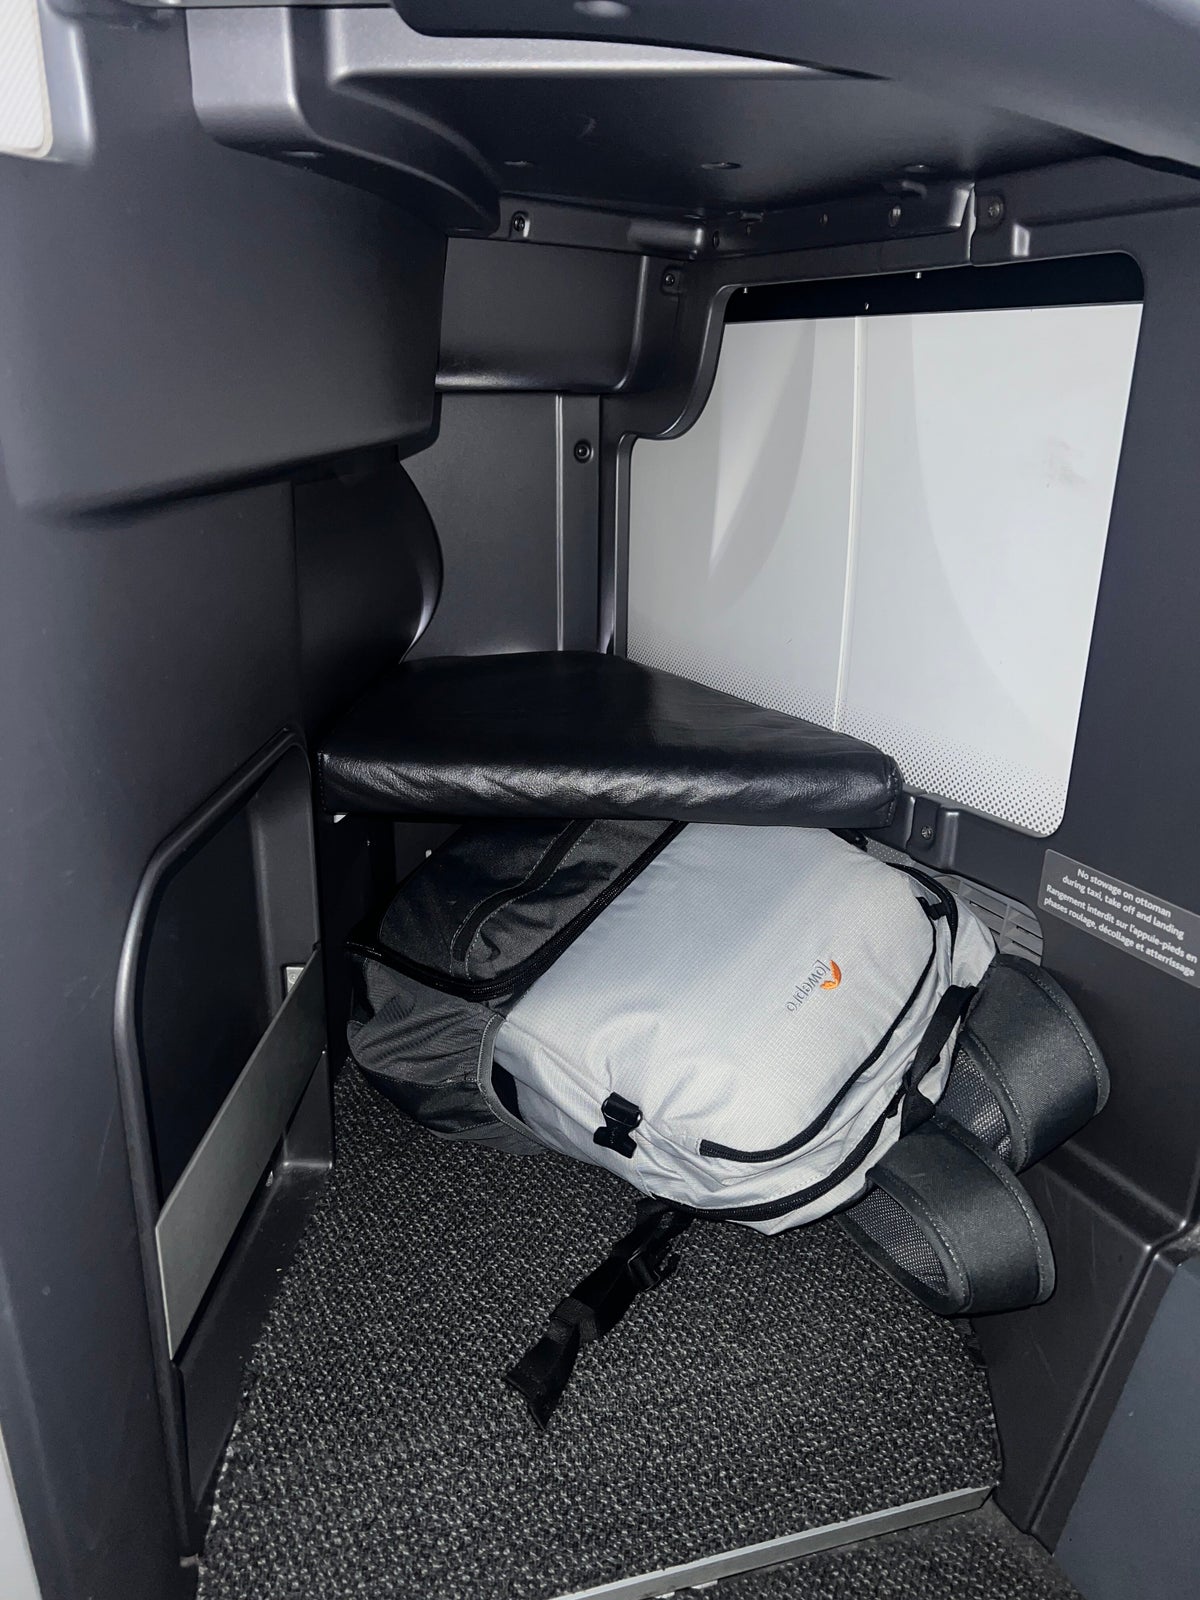 Air Canada business class footwell and storage